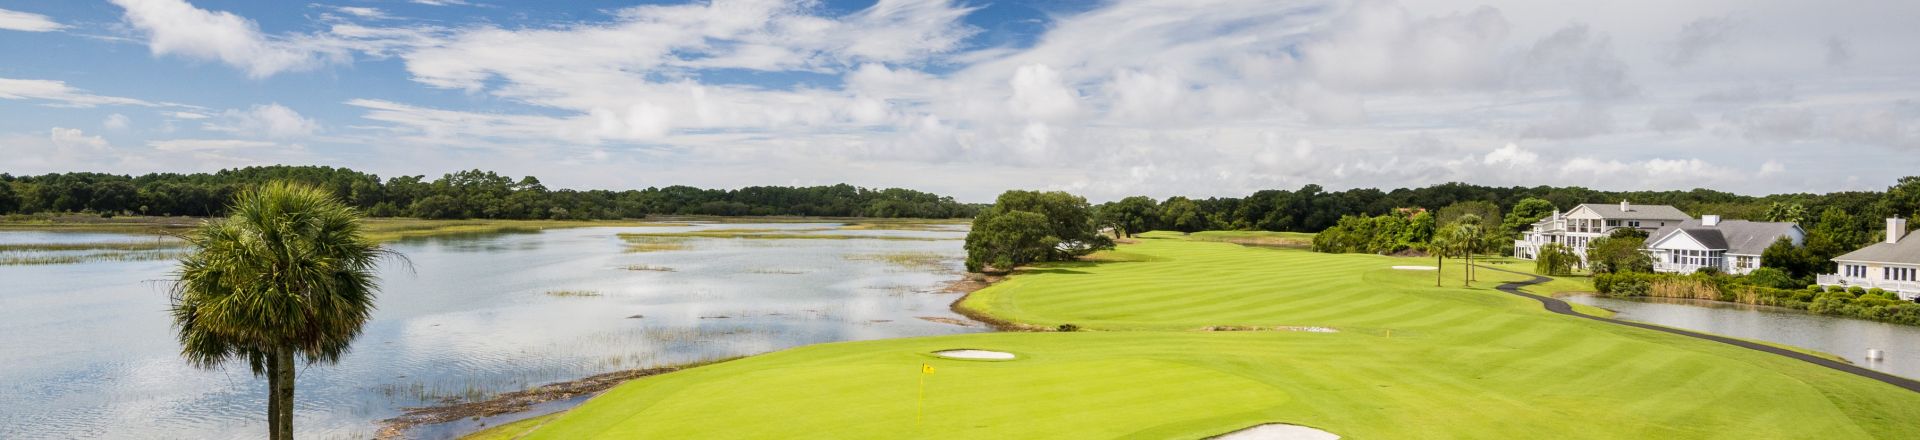 Escape to the serene beauty of Oak Point Golf Course at Kiawah Island Golf Resort. This image invites you to a premier golfing destination, showcasing meticulously designed fairways amidst the natural splendor of Kiawah Island.